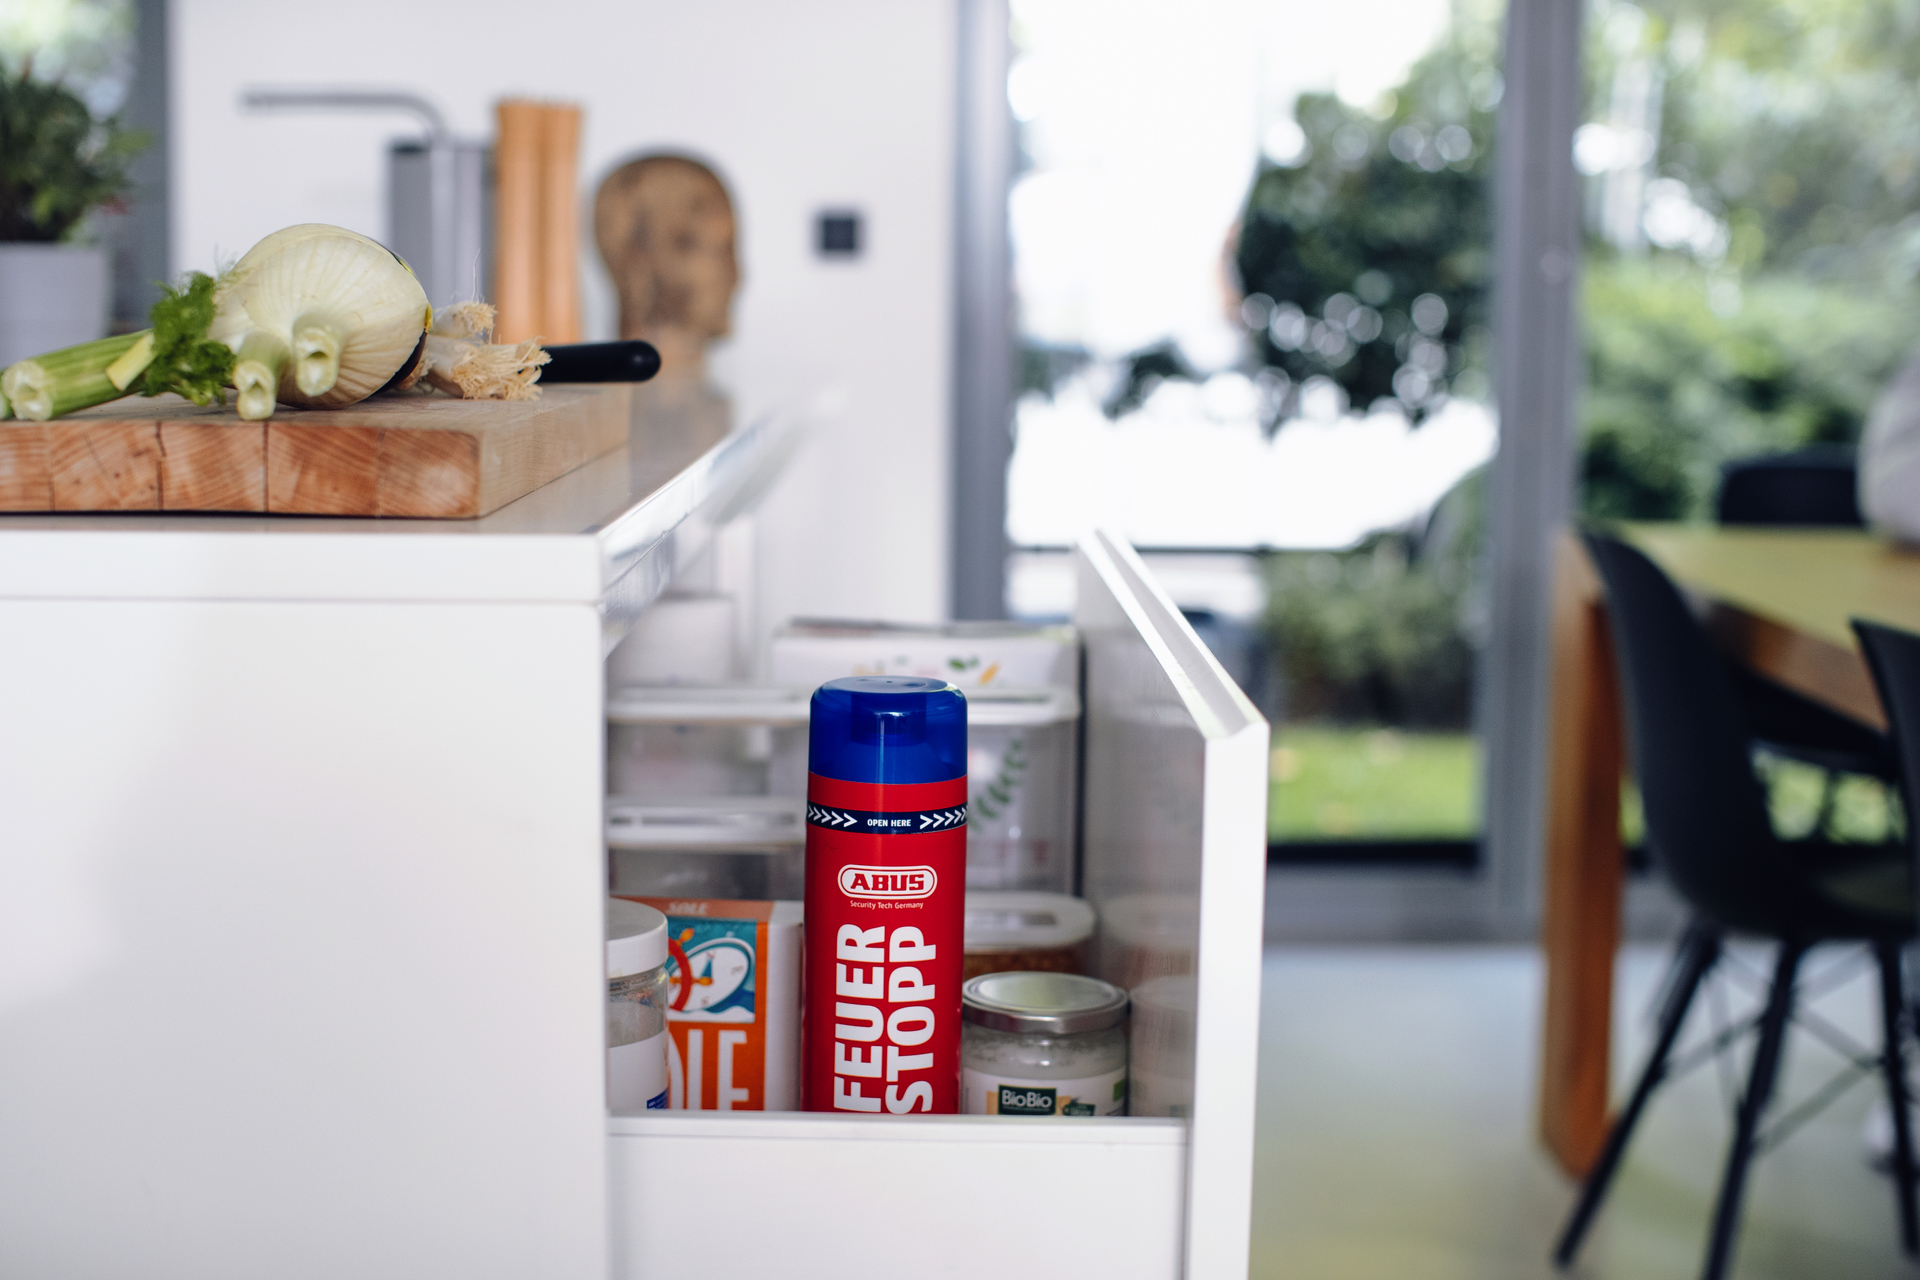 Application example – Fire Extinguisher Spray in the kitchen